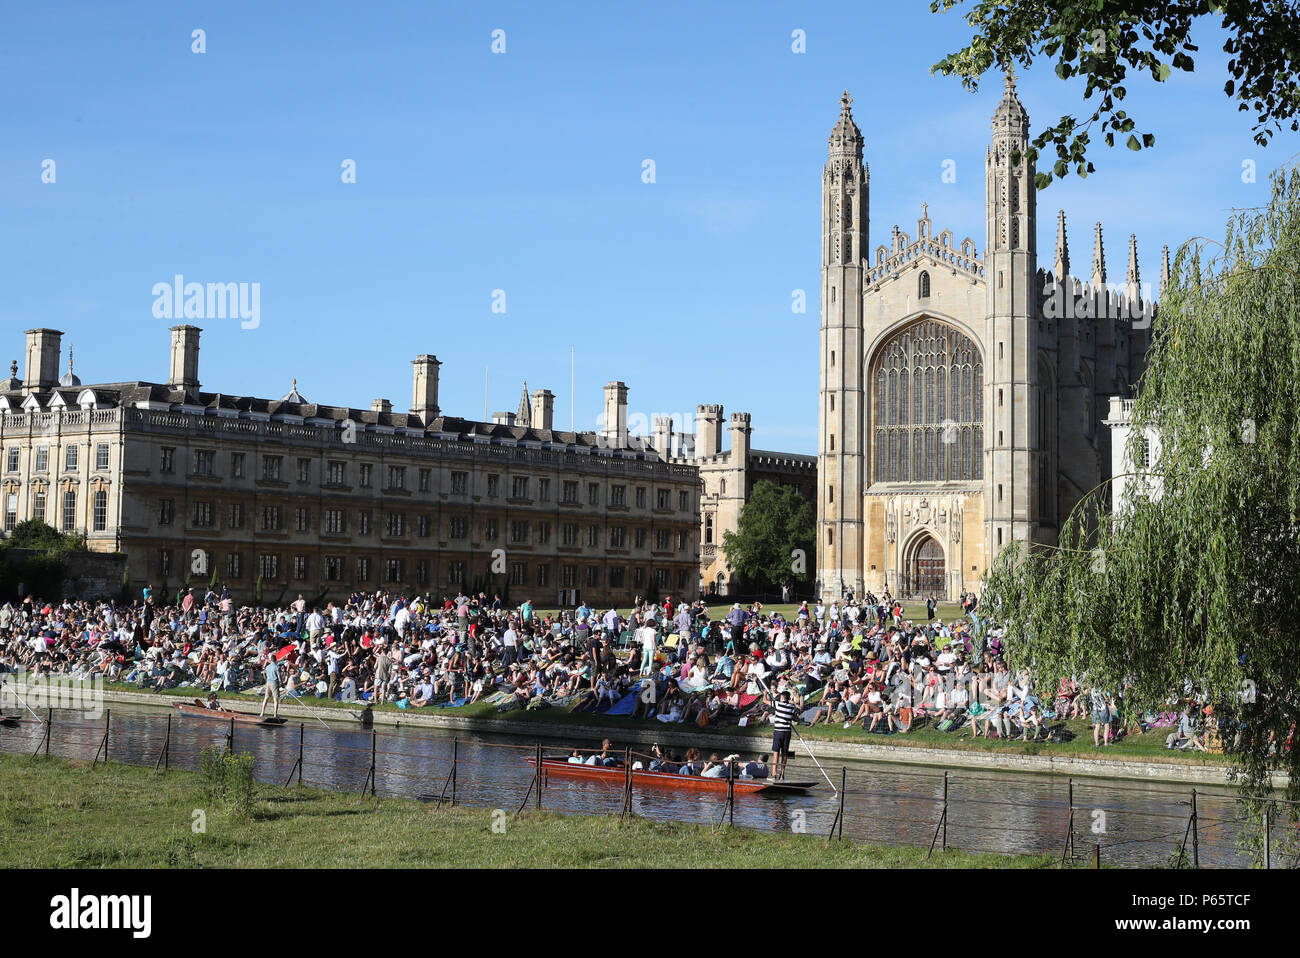 A Punt makes it's way along the river in front of Kings College Chapel at the University of Cambridge. Stock Photo